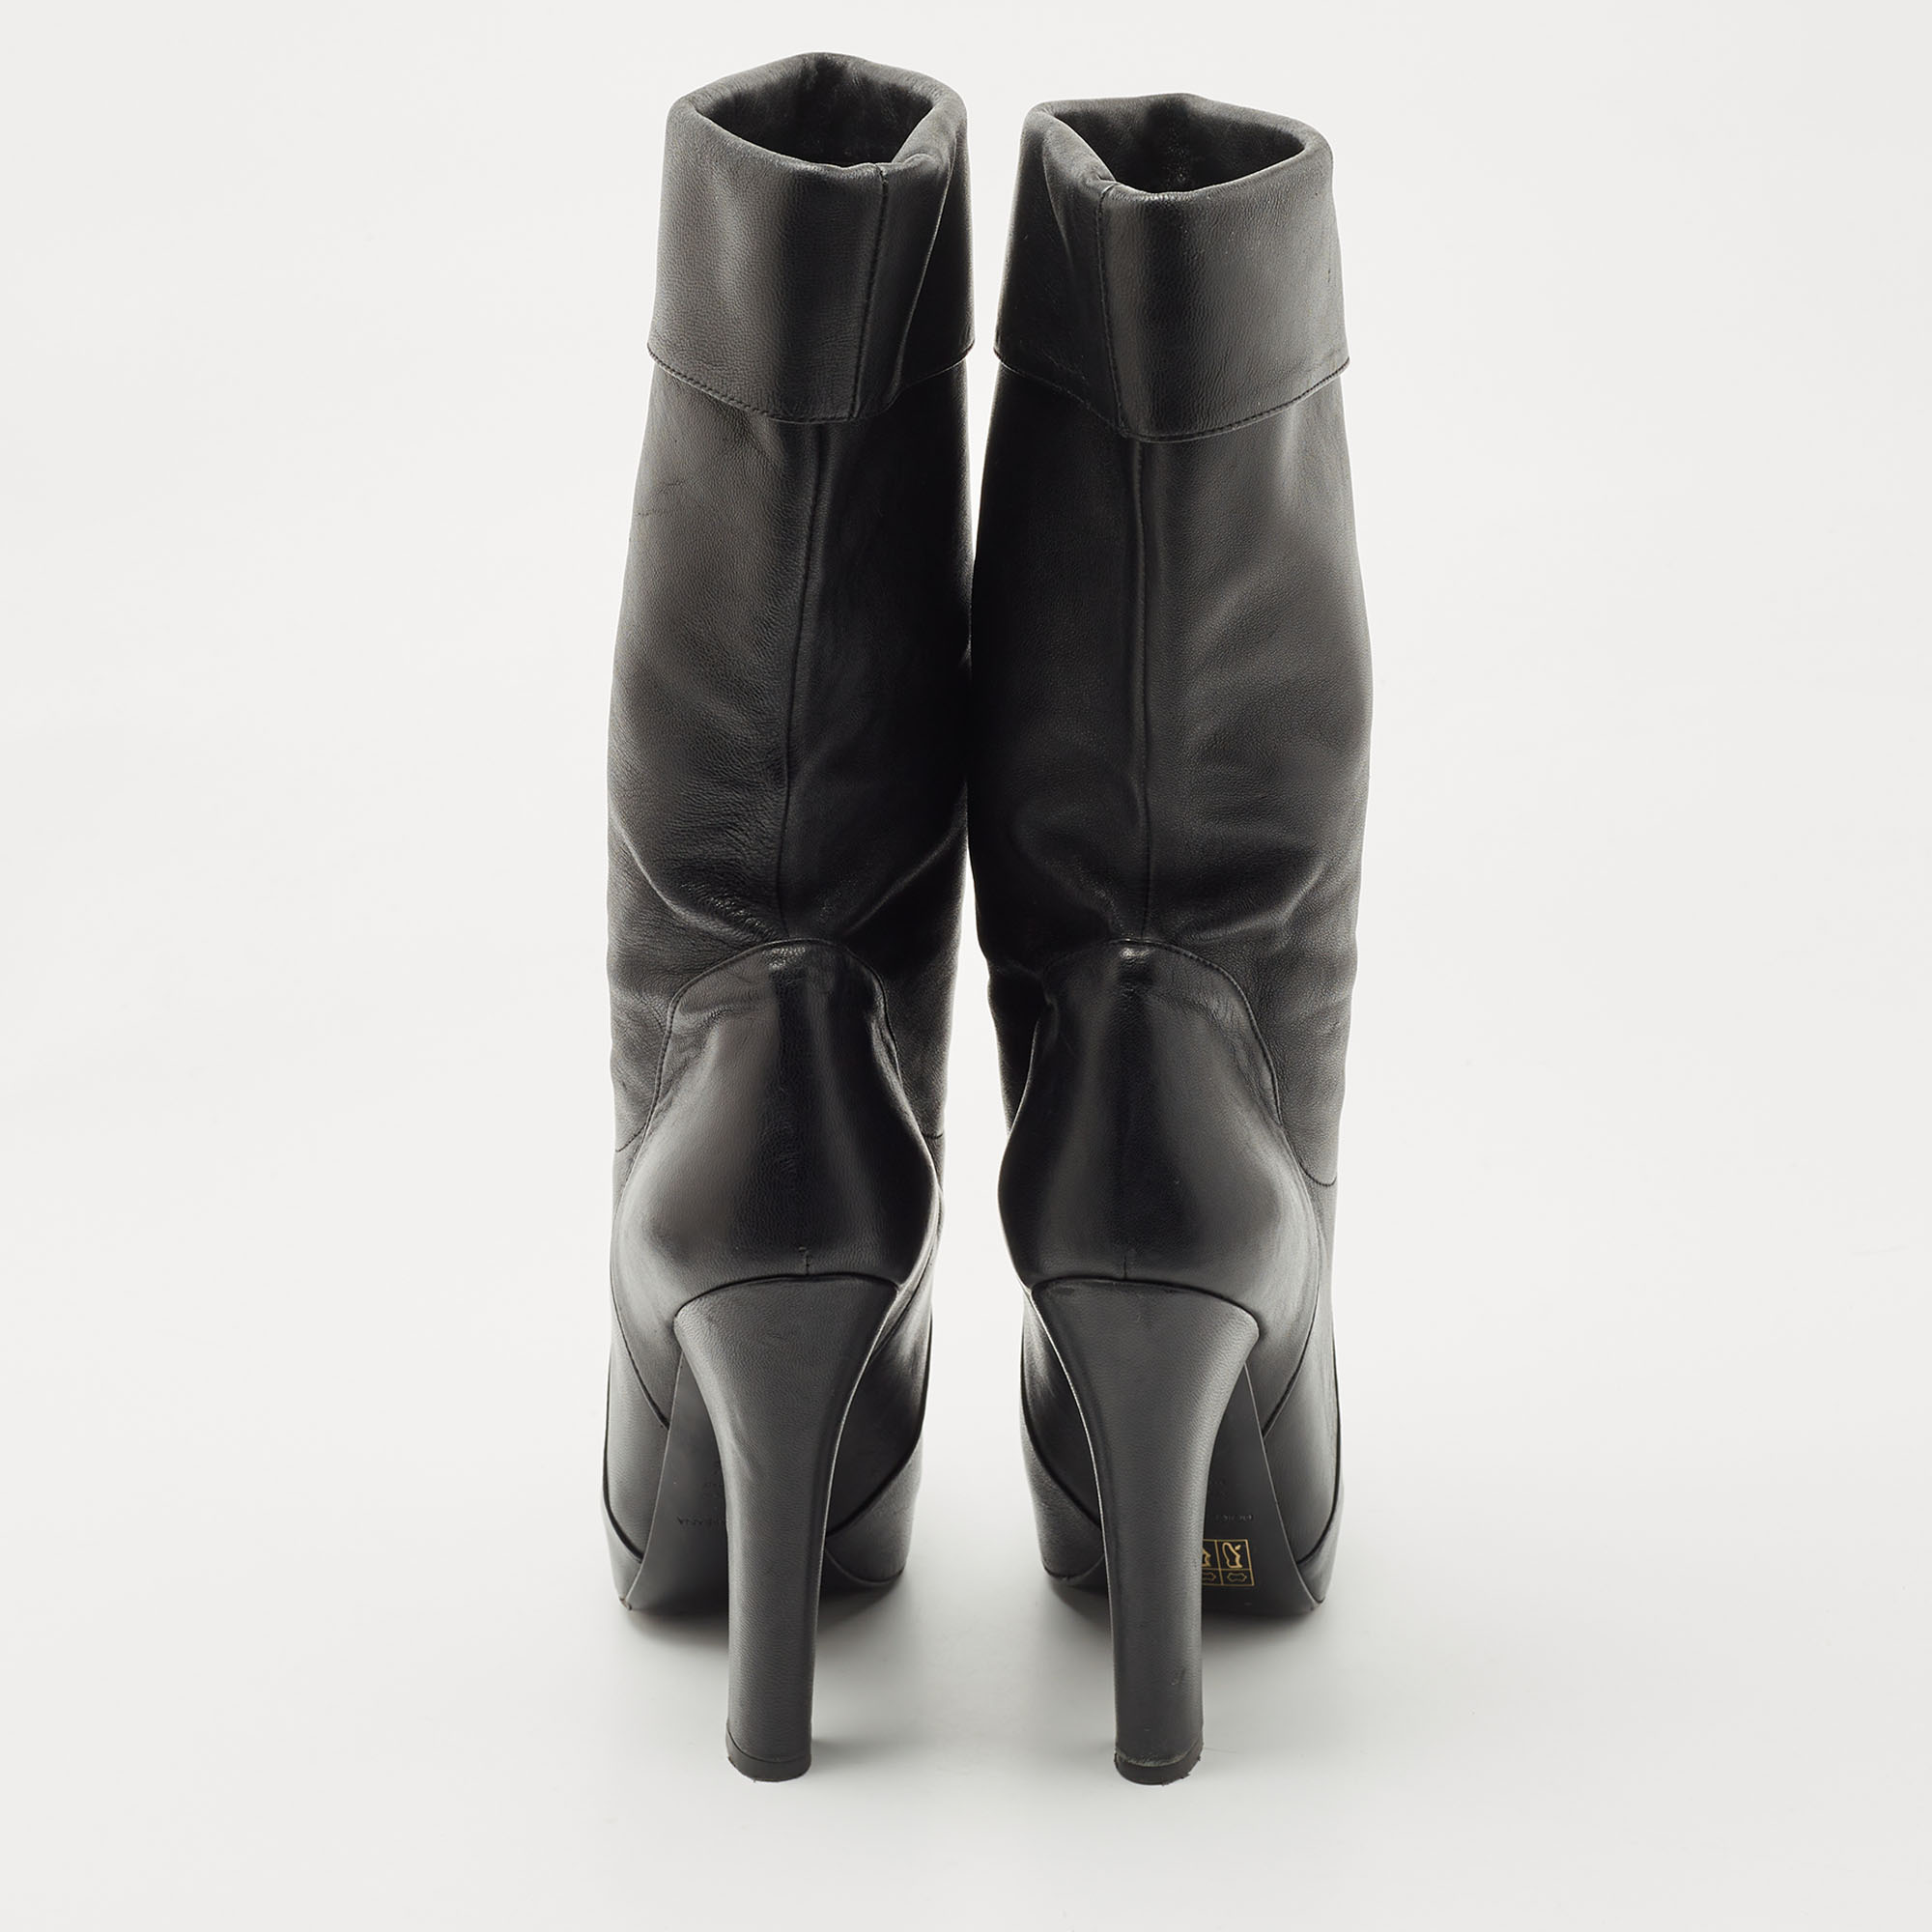 Dolce & Gabbana Black Leather Calf Length Boots Size 37.5